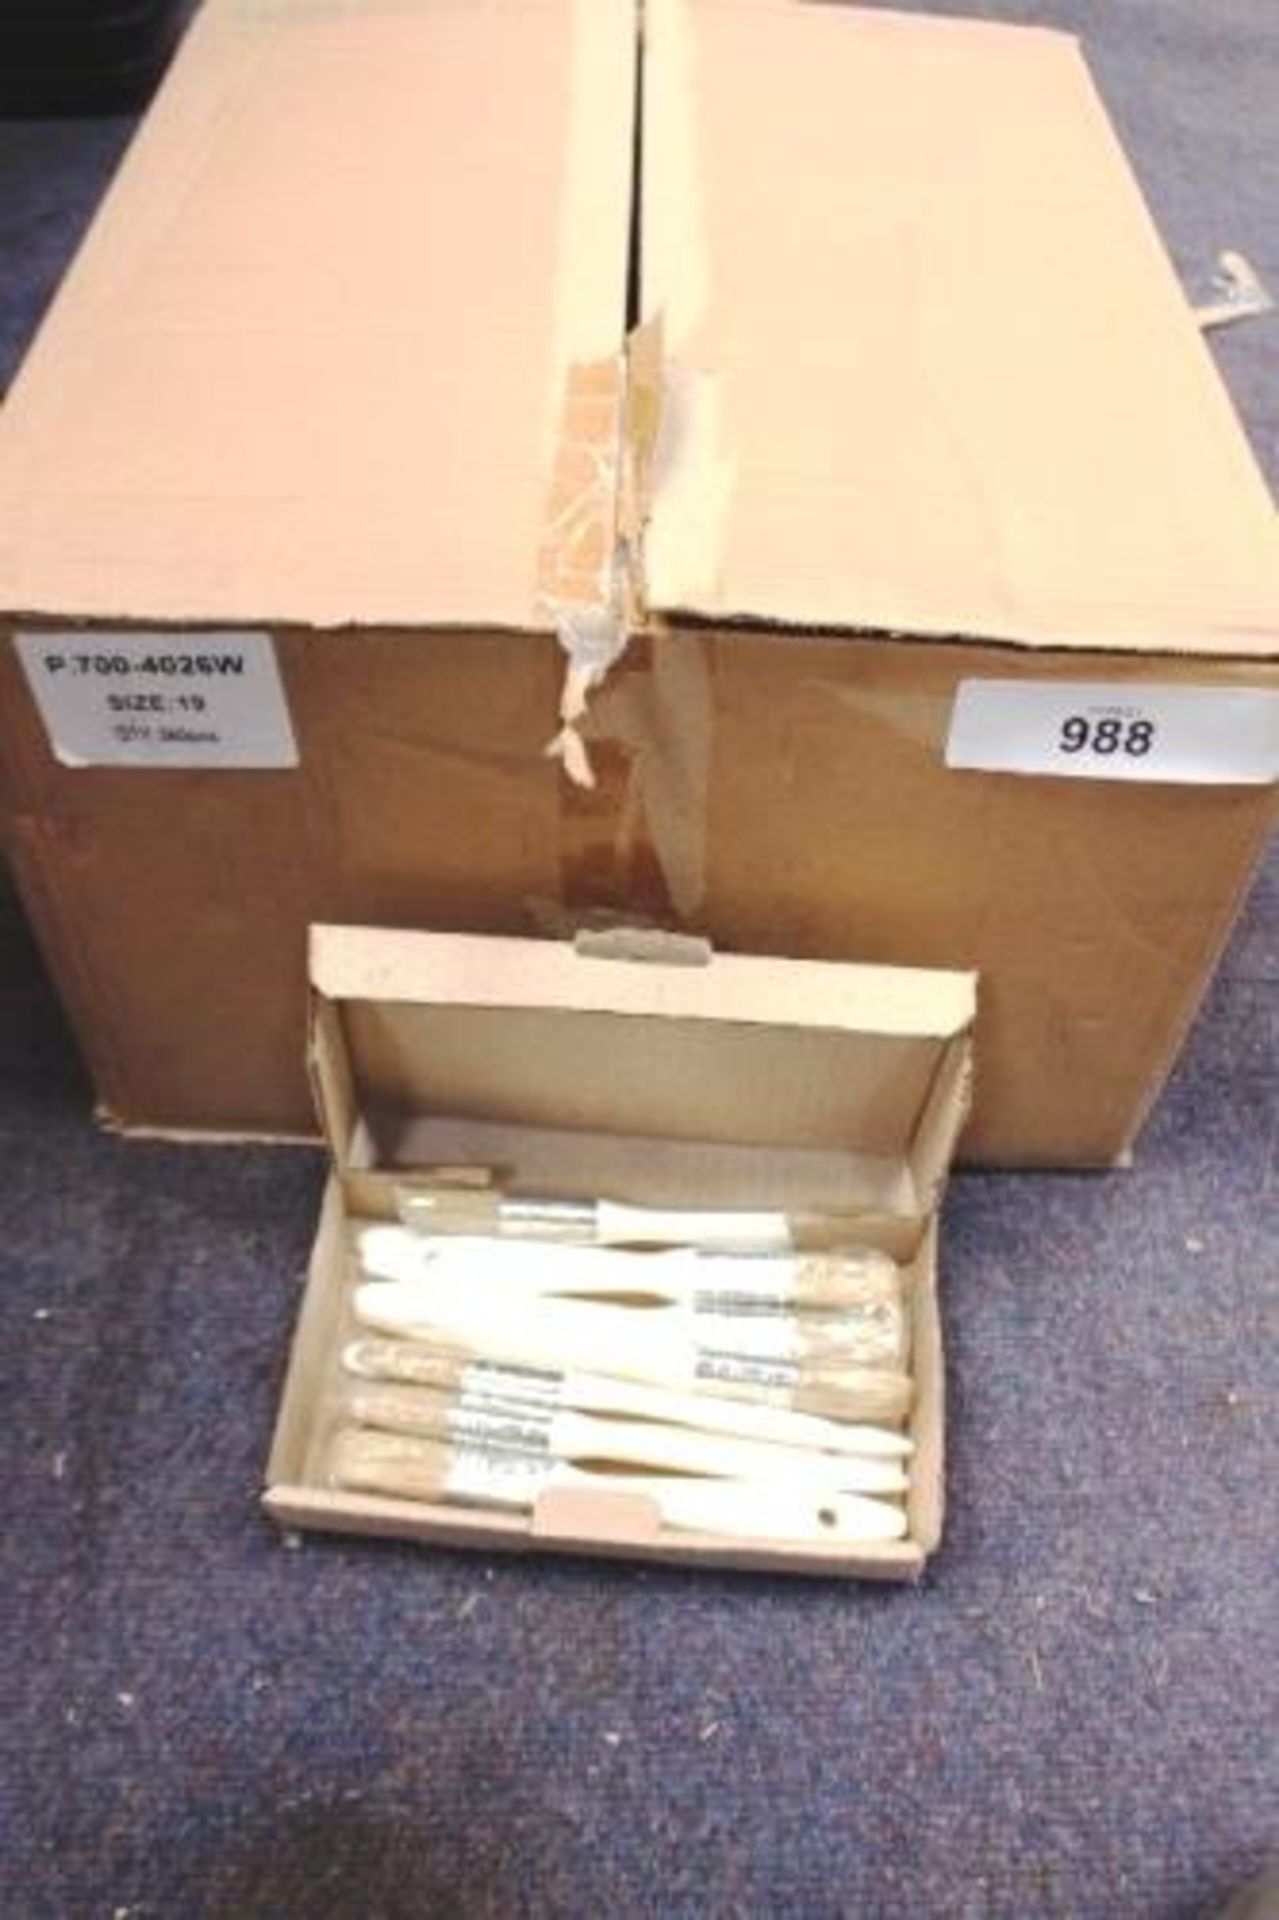 Approximately 360 x size 19, 3/4" paint brushes - new (Cabs Floor)